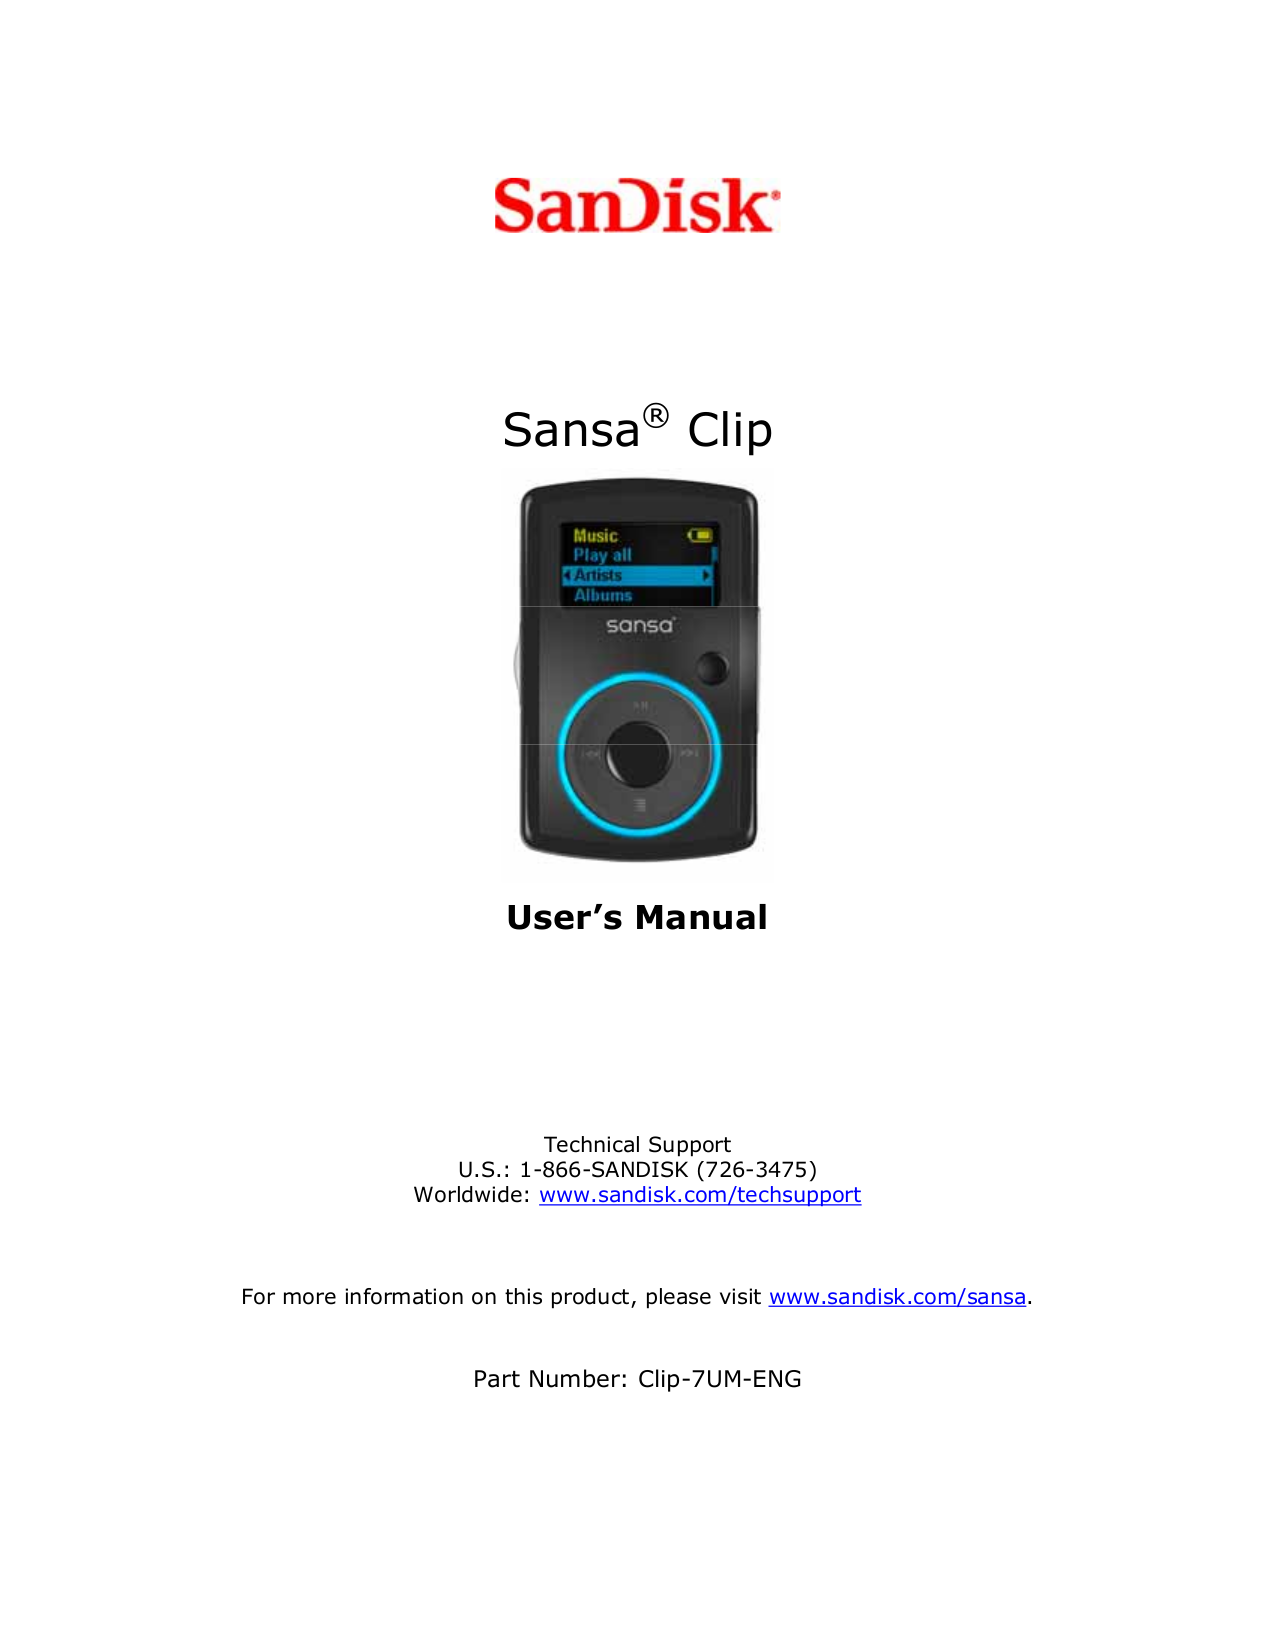 sandisk mp3 player instructions